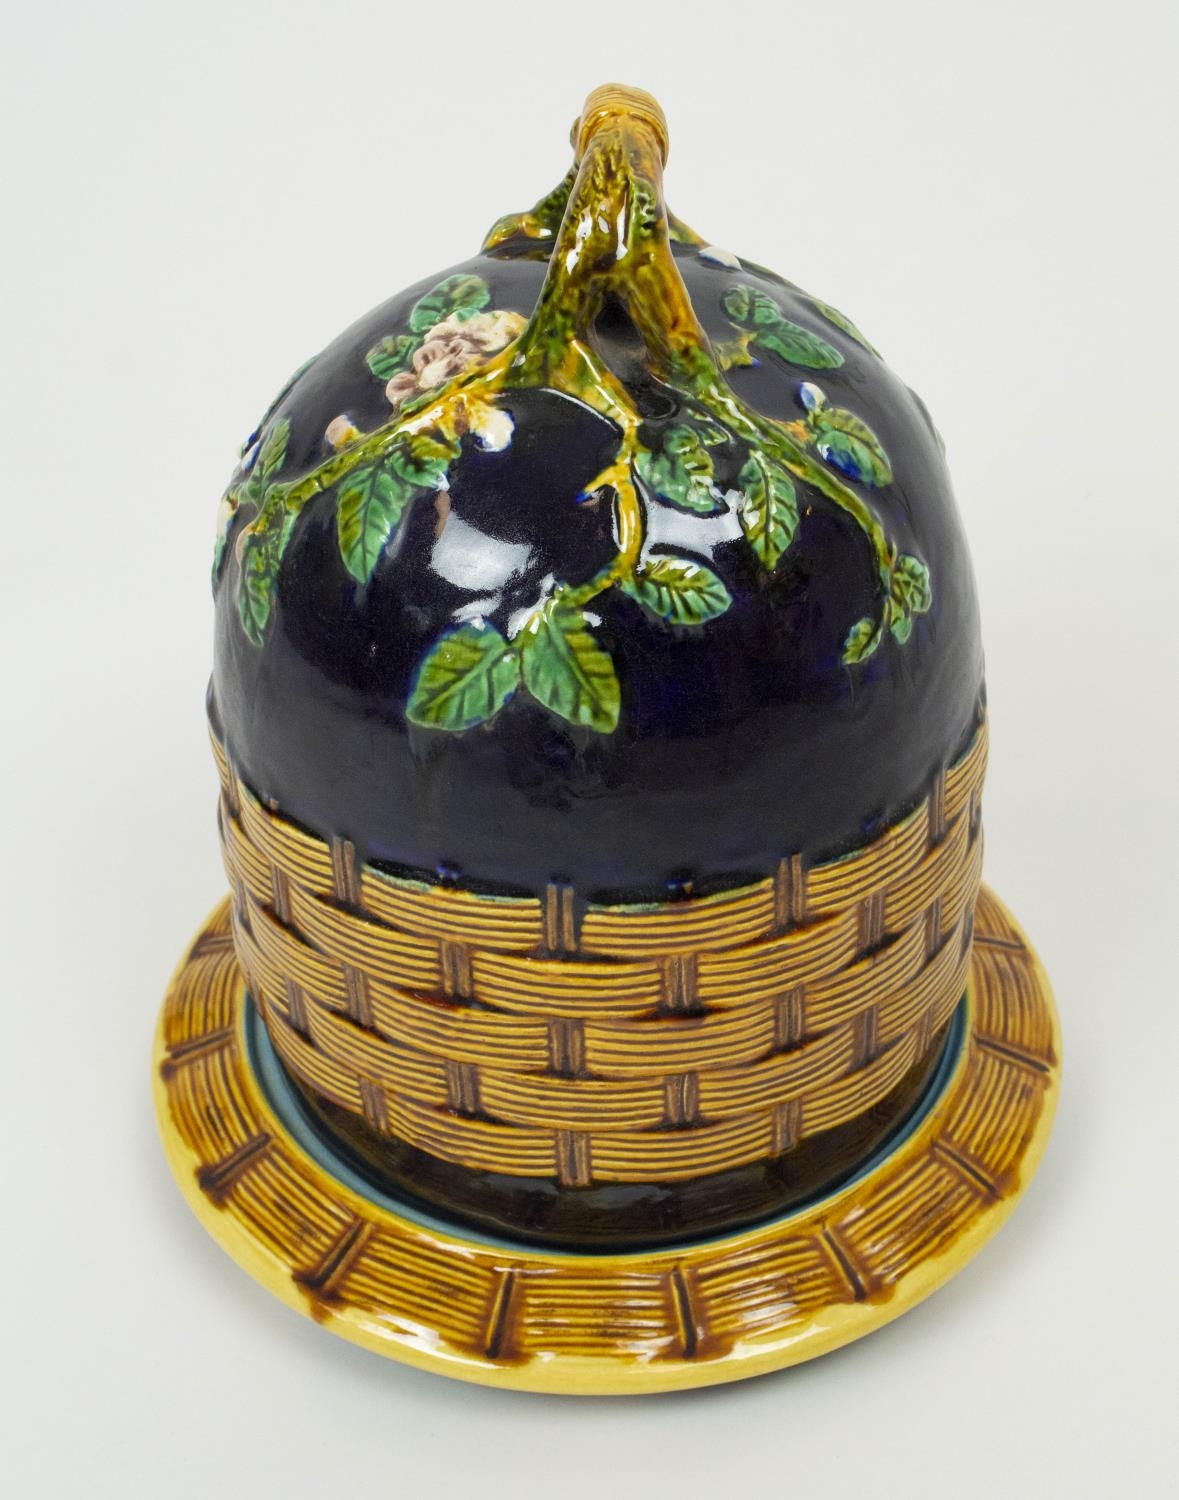 MAJOLICA CHEESE DOME, after George Jones, 30cm H x 26cm W, 'apple blossom pattern', cobalt blue - Image 5 of 8